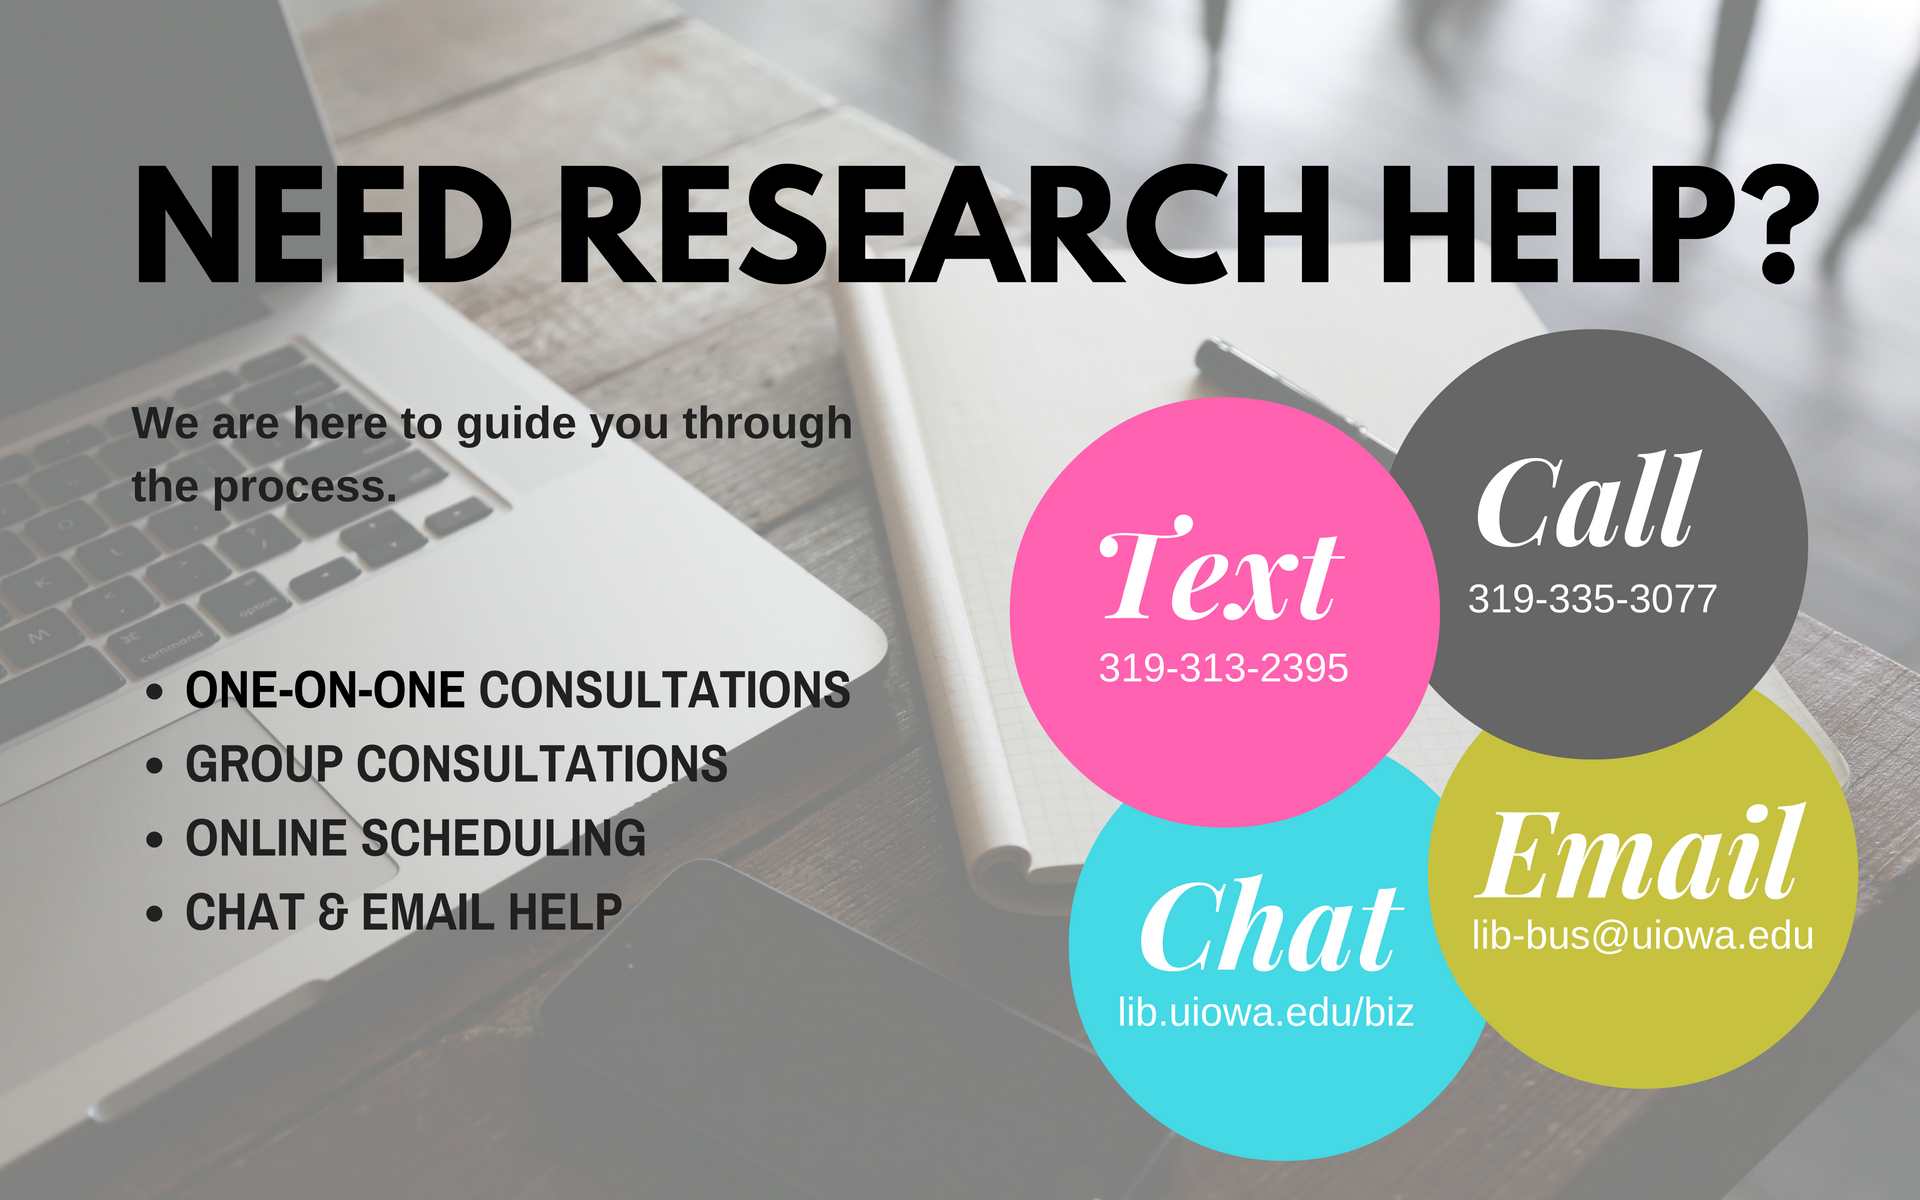 Need Research Help?